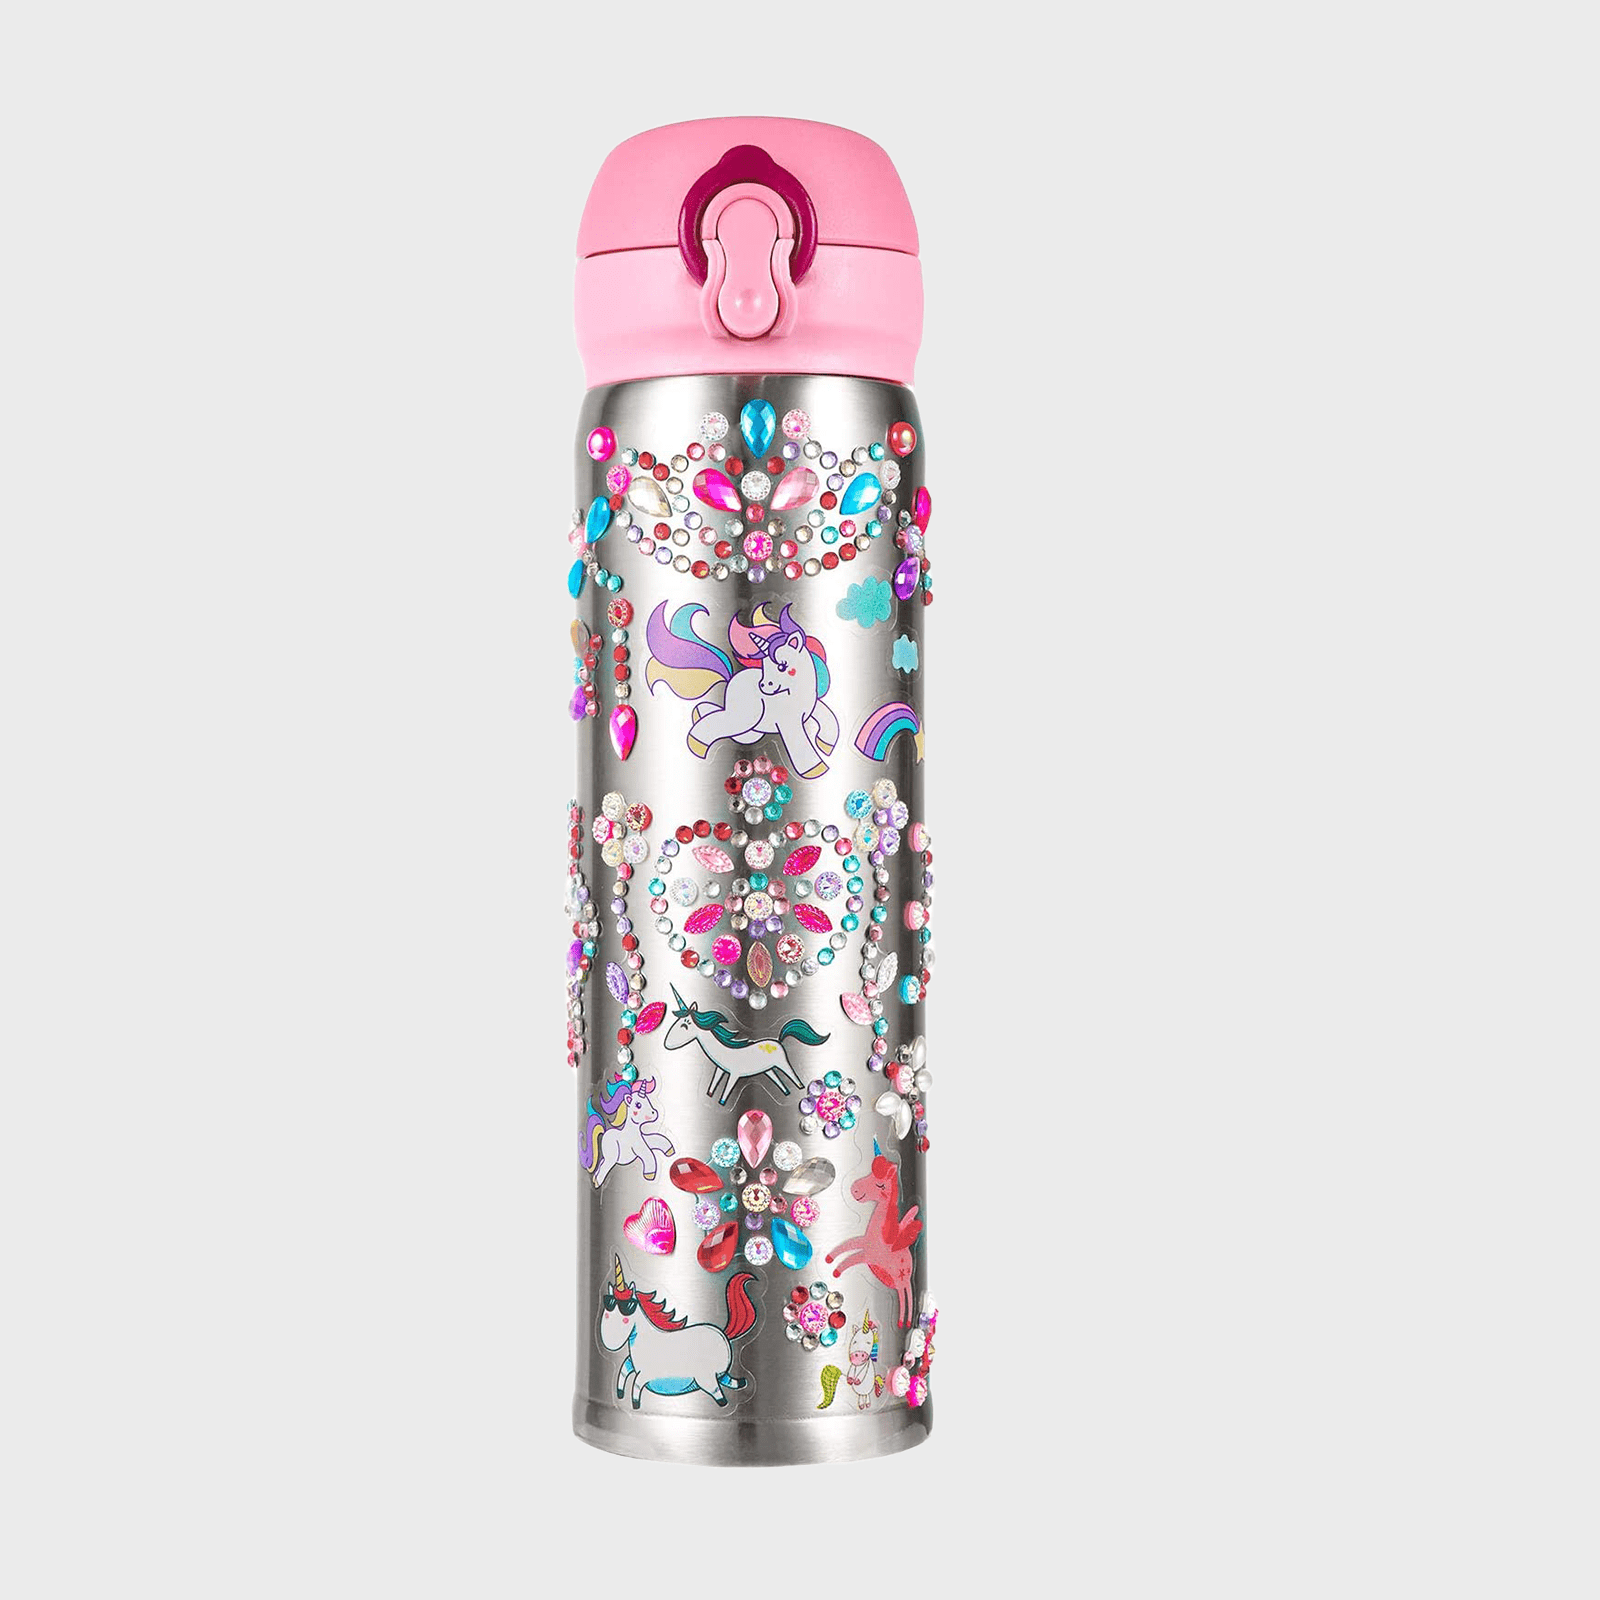  YOFUN Decorate Your Own Water Bottle with 11 Sheets of Unicorn  Stickers & Glitter Gems, Craft Kit & Art Kit for Children, Gift for Girls  Age 4 5 6 7 8